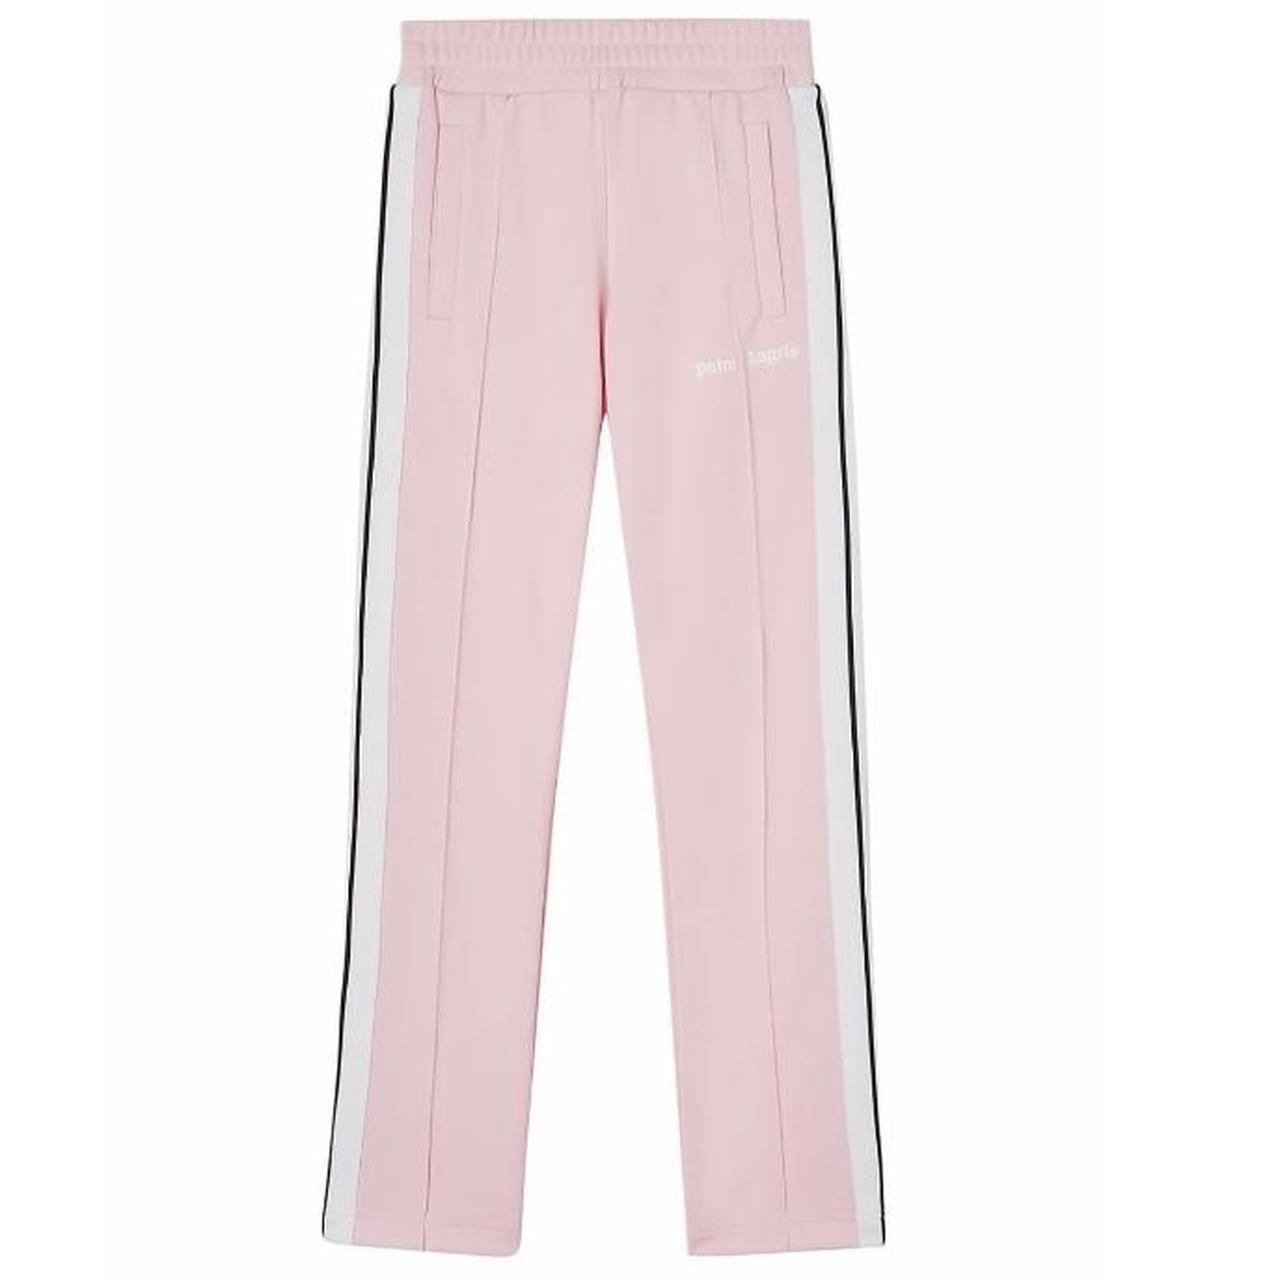 Palm Angels Women's Pink Trousers (2)